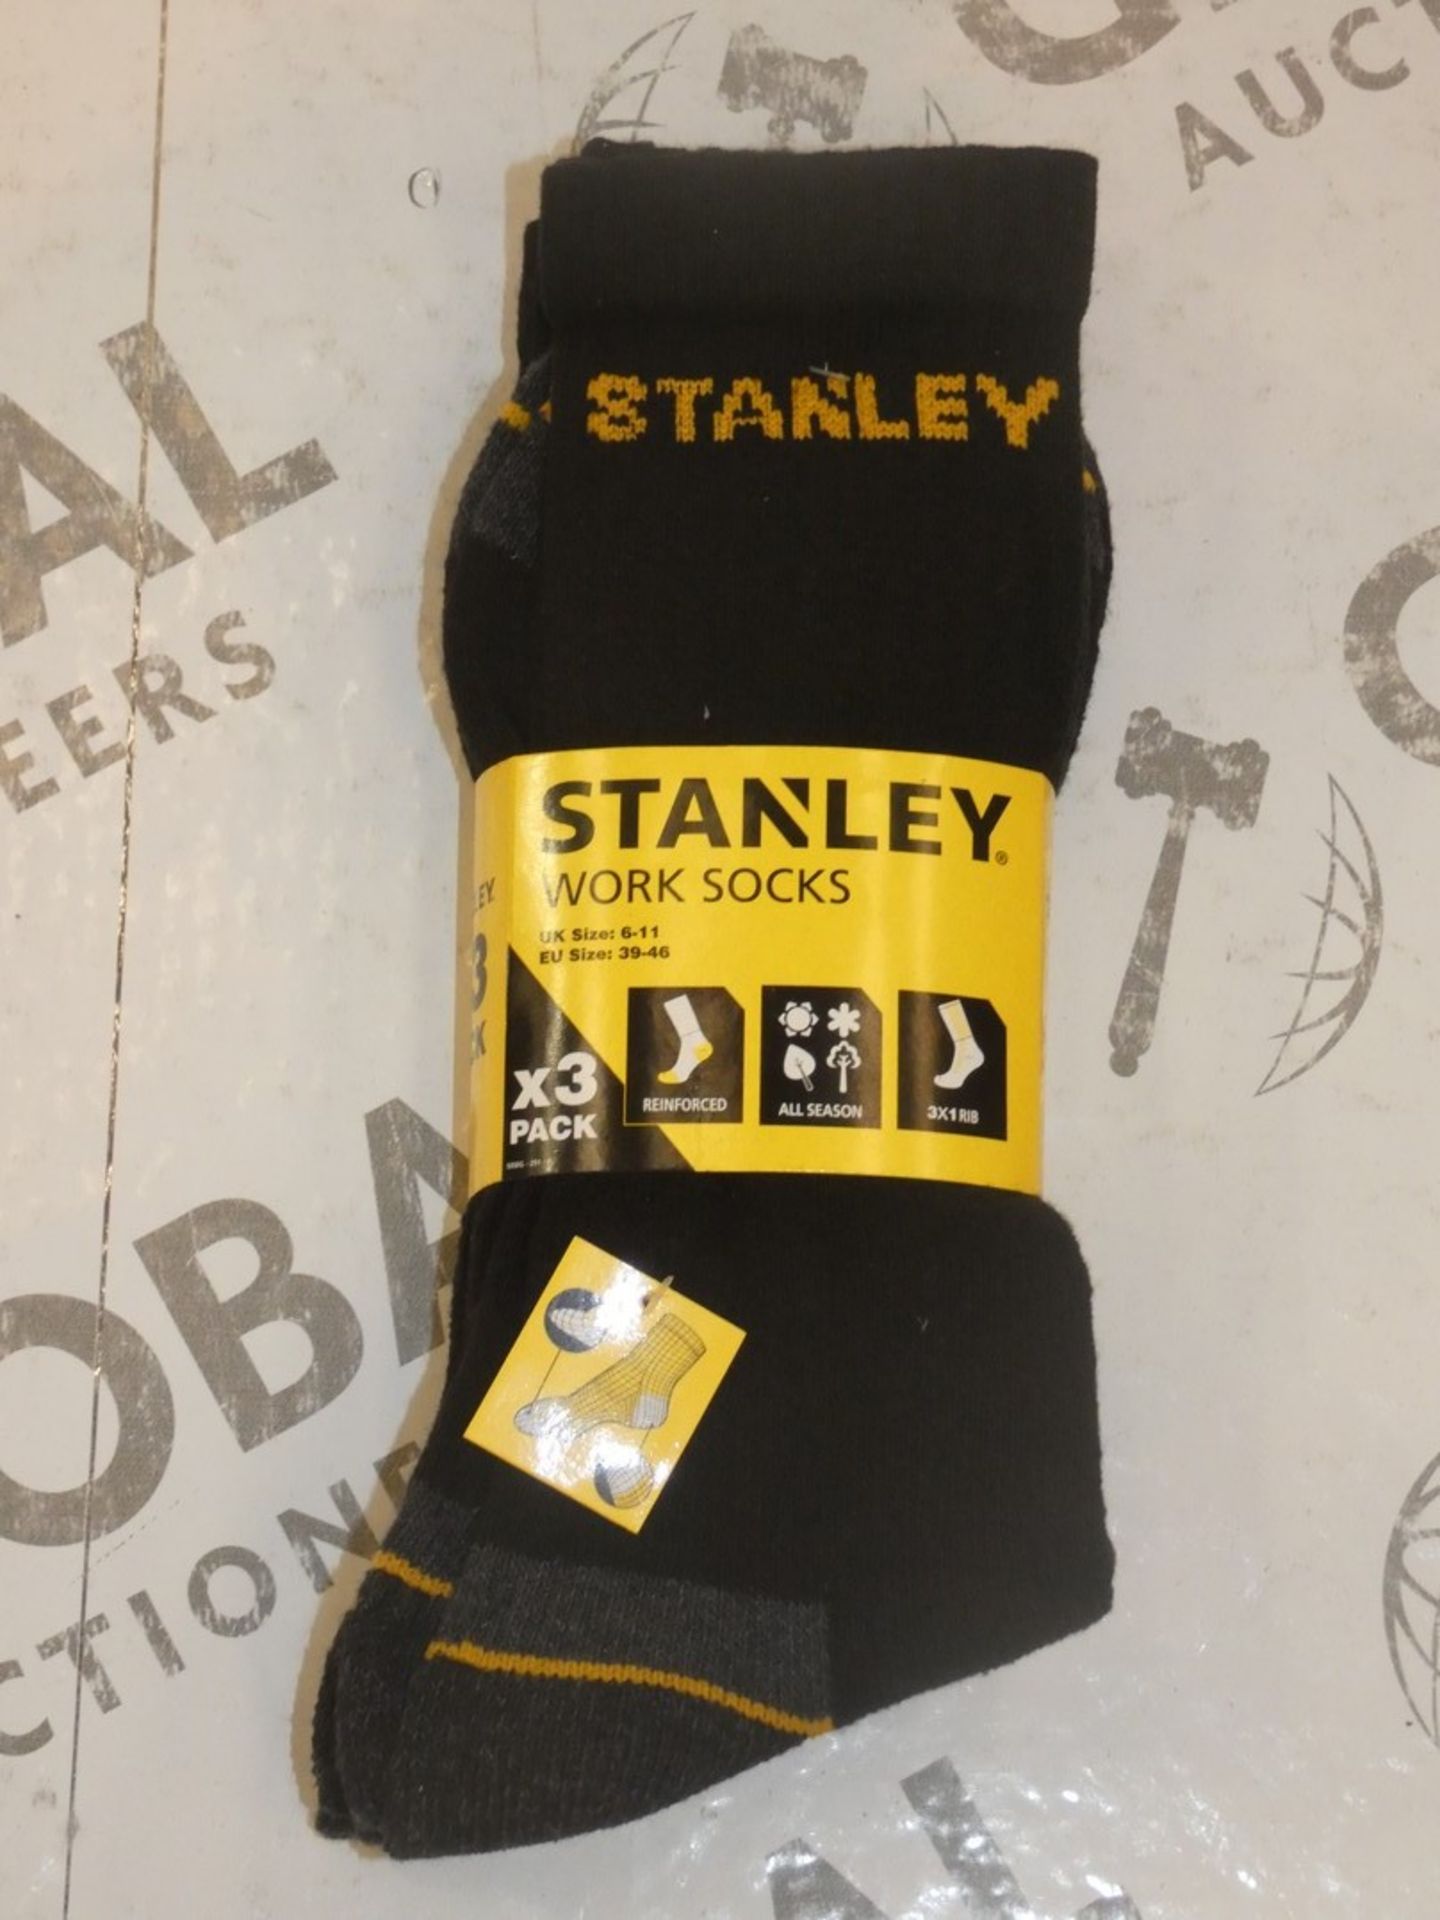 Box Containing 48 Packs of 3 Stanley Work Socks in Size 6 - 11 Combined RRP £290